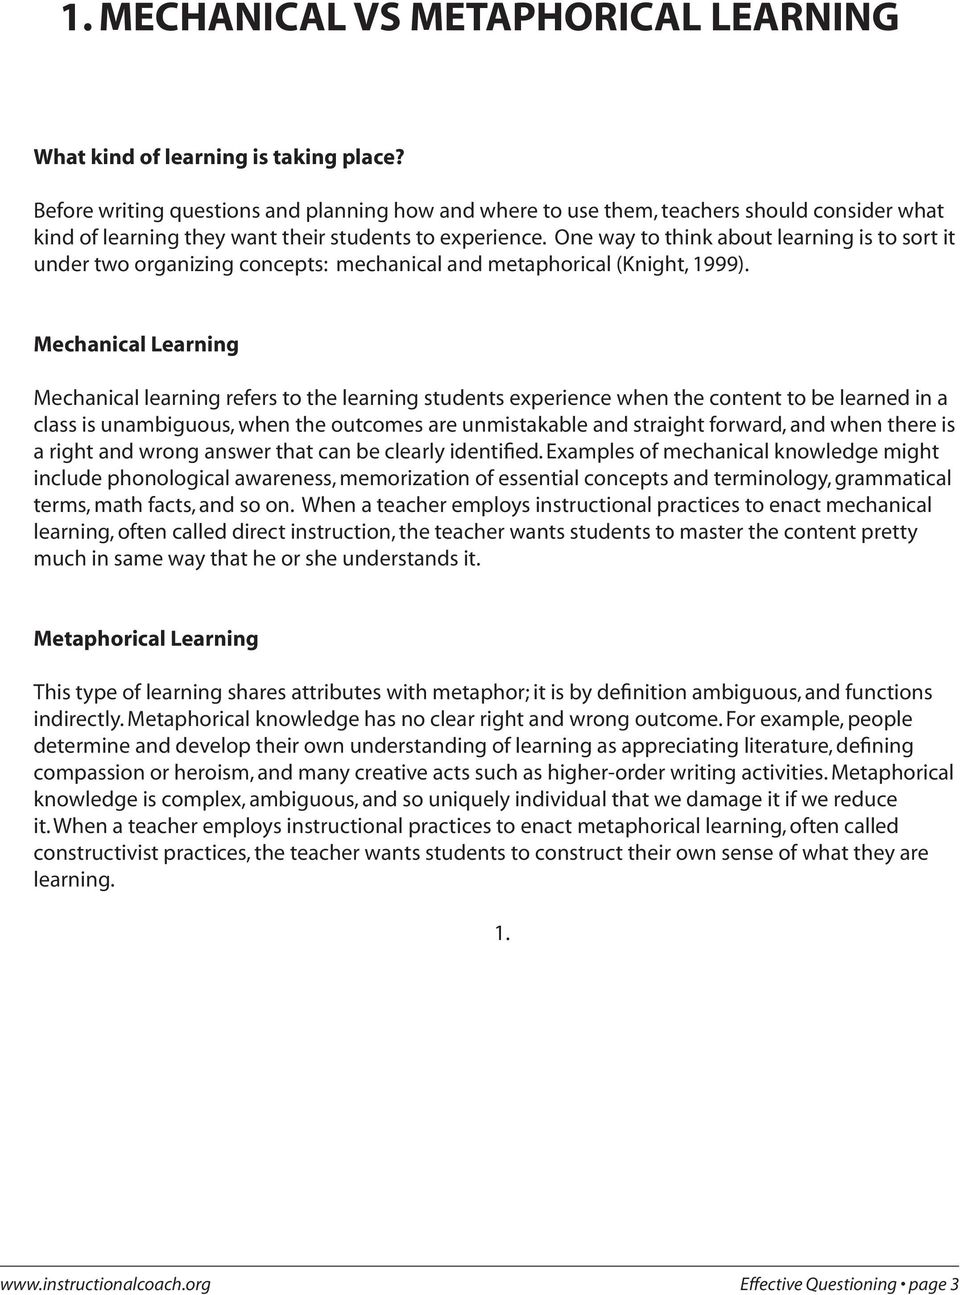 One way to think about learning is to sort it under two organizing concepts: mechanical and metaphorical (Knight, 1999).